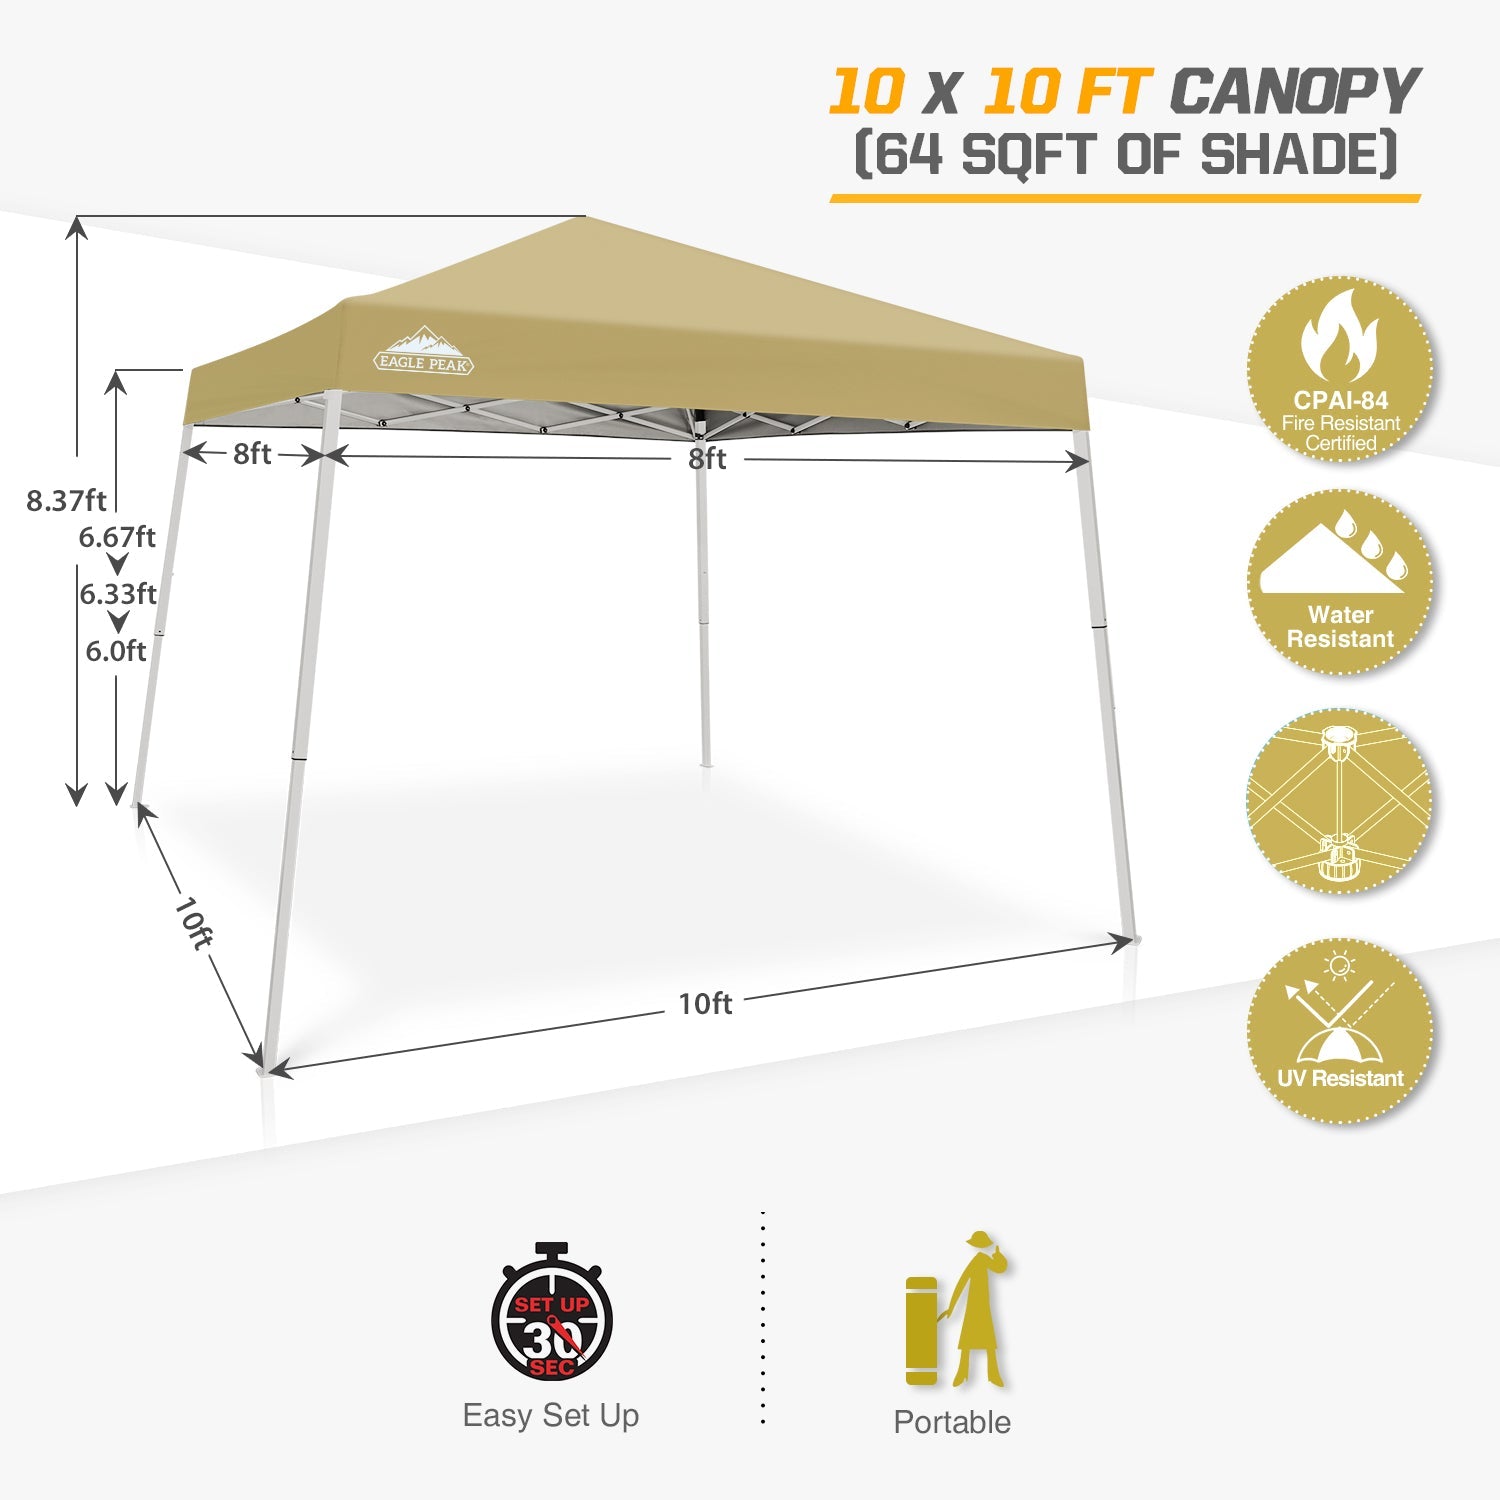 EAGLE PEAK 10' x 10' Slant Leg Pop-up Canopy Tent Easy One Person Setup Instant Outdoor Canopy Folding Shelter with 64 Square Feet of Shade (Beige)